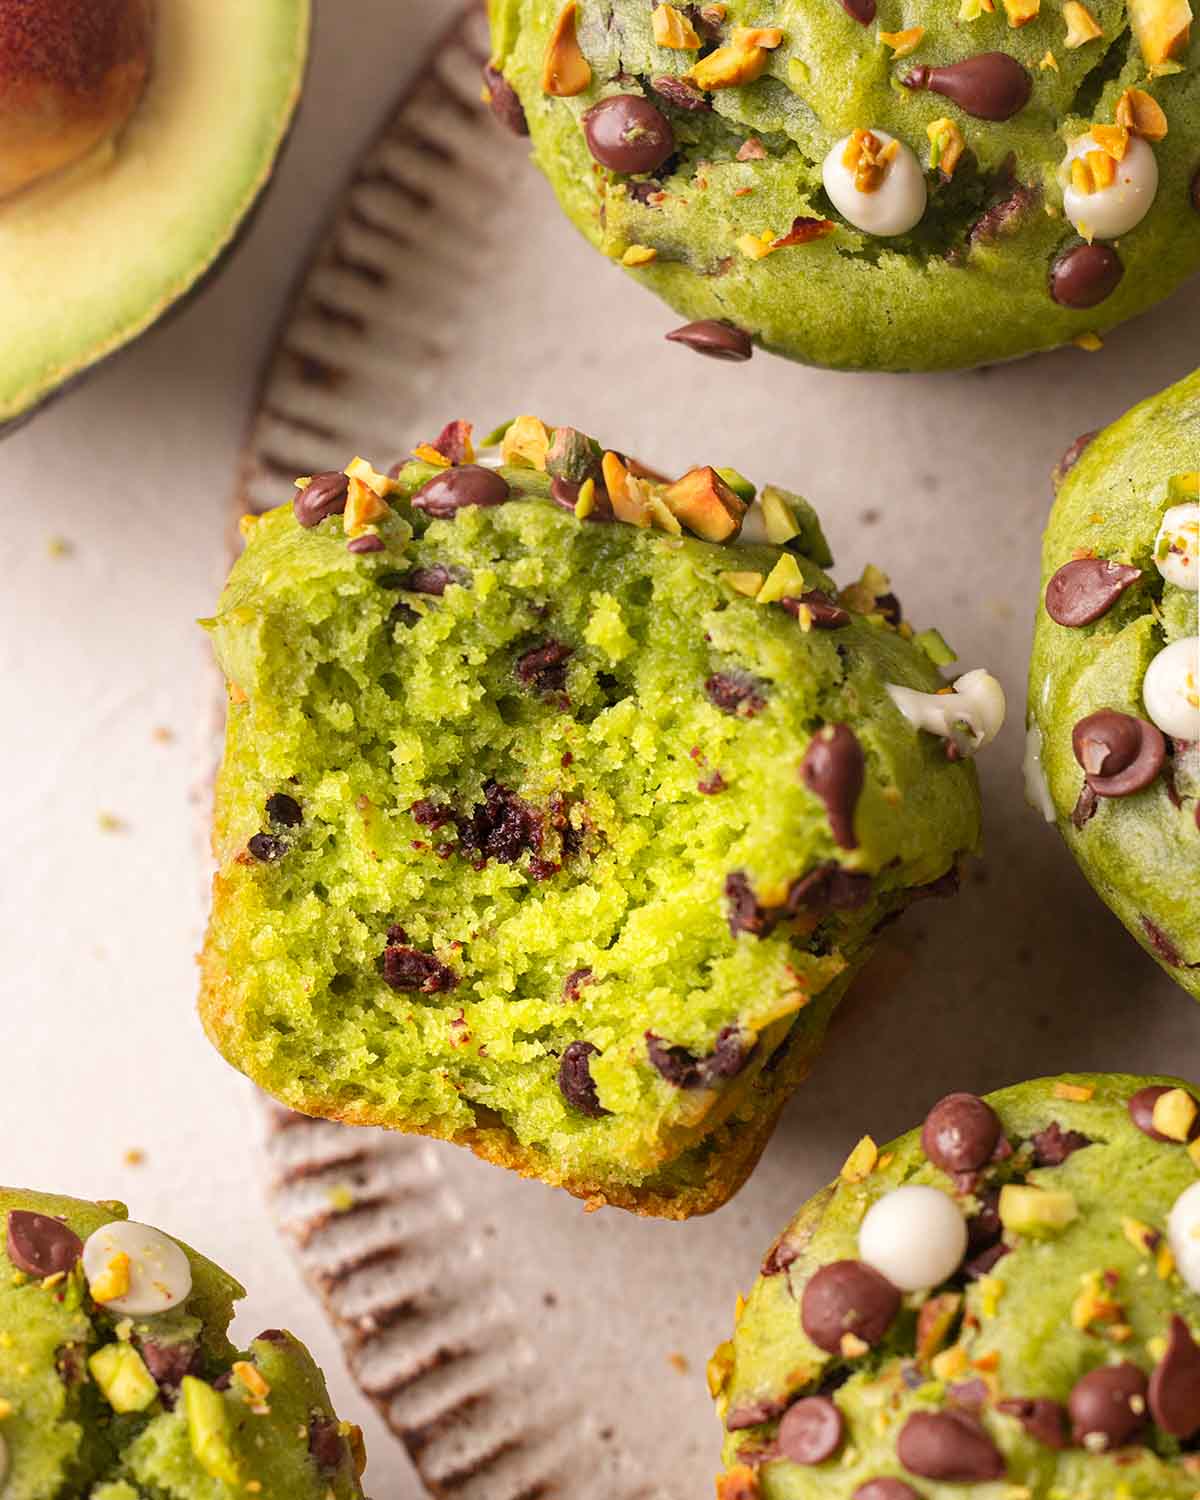 Close up of avocado muffin which has a bite taken out, revealing fluffy green interior.